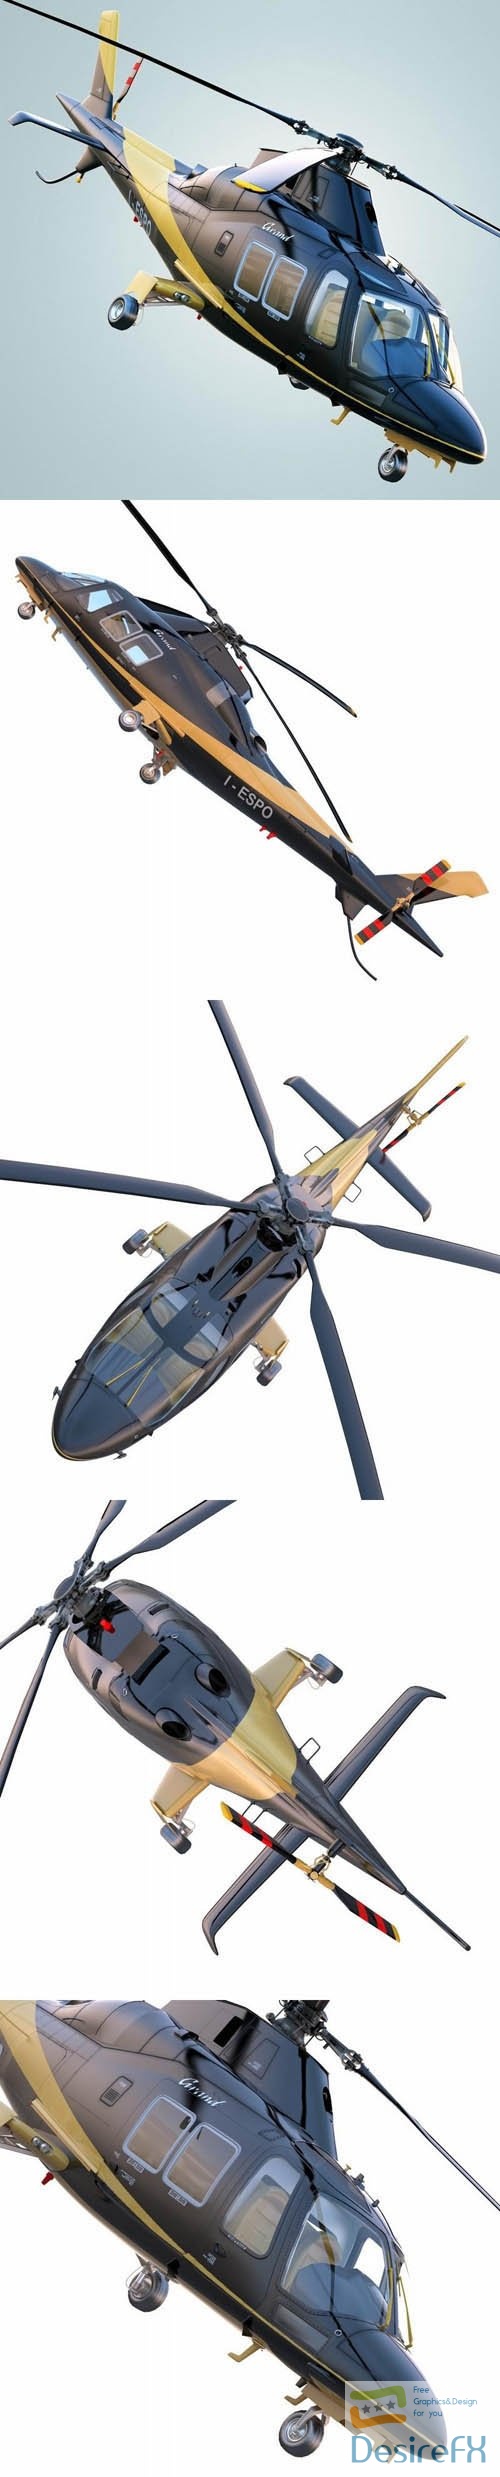 Realistic and fully detailed model Augusta Westland Grand New helicopter